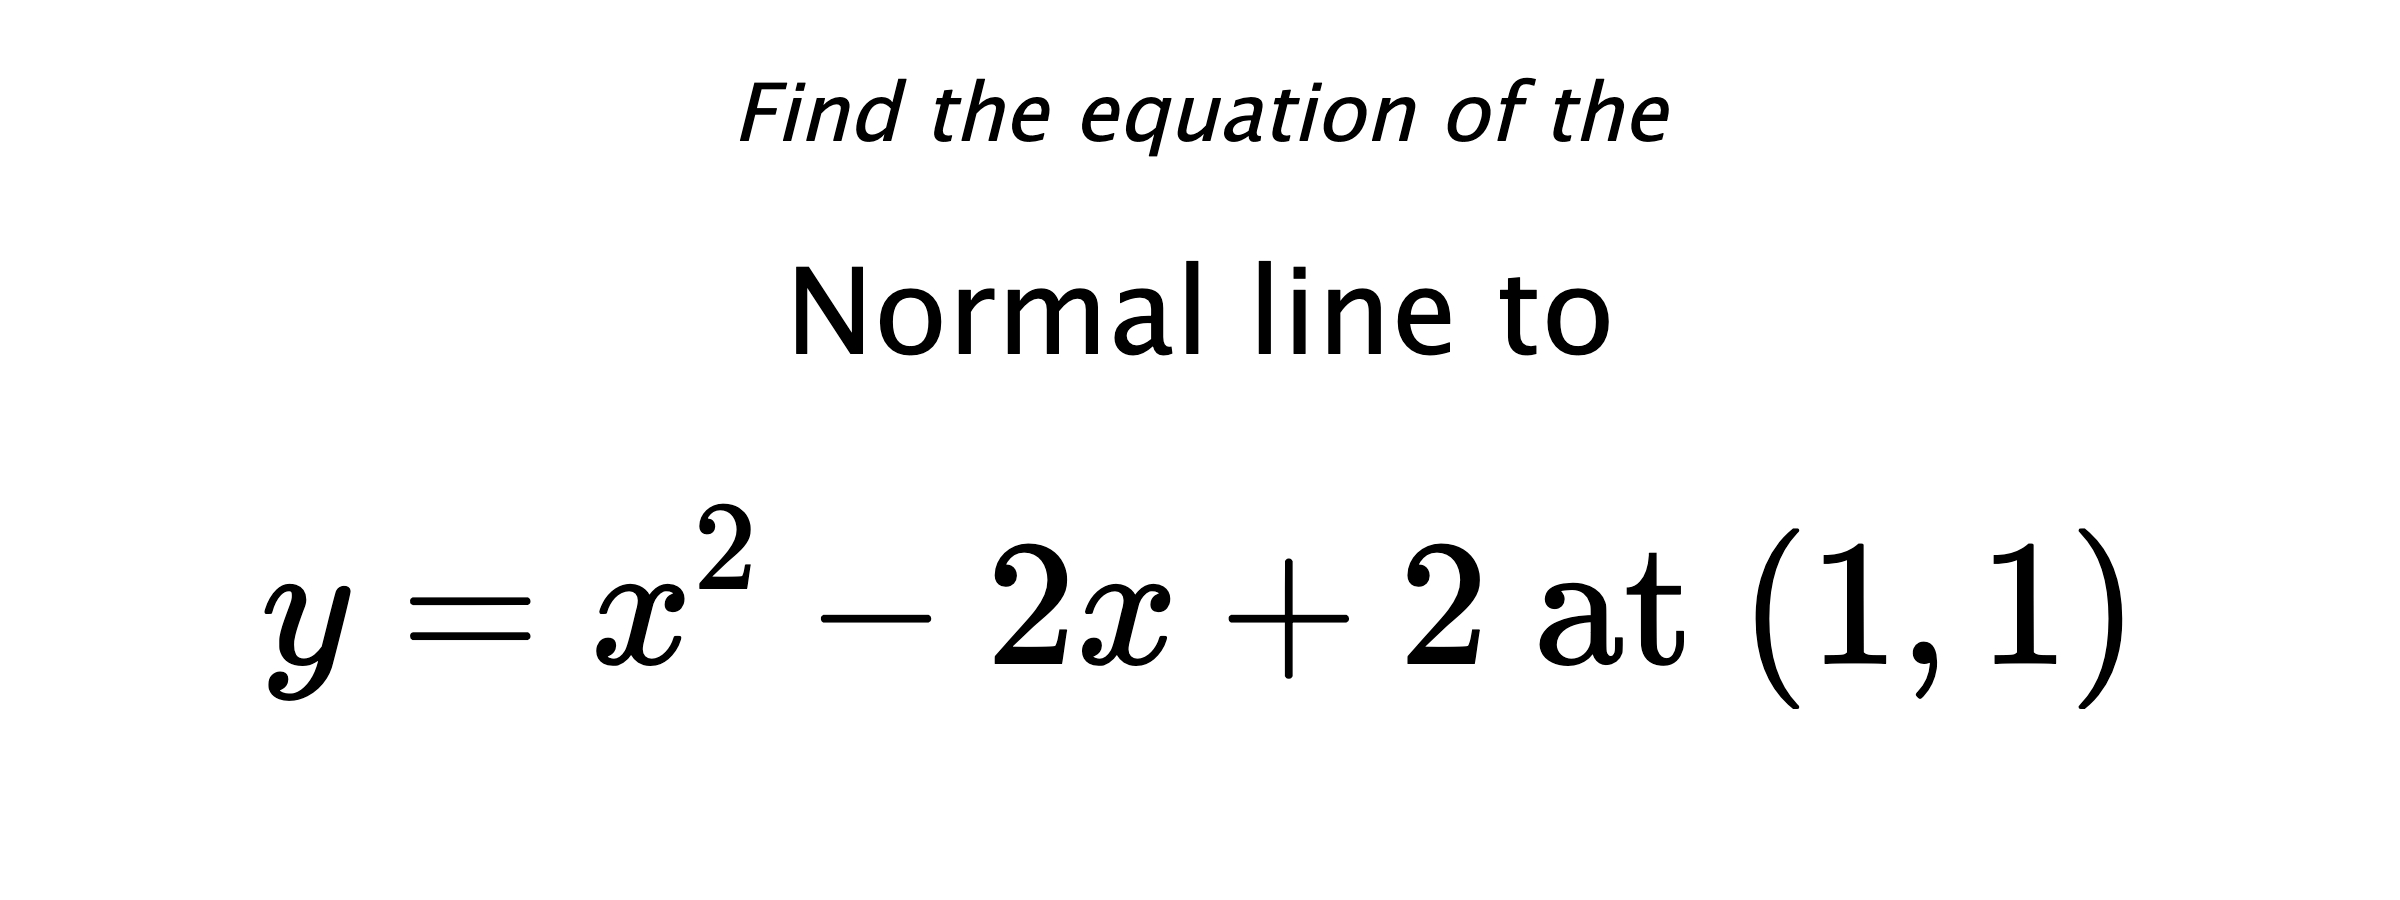 Find the equation of the Normal line to $$ y=x^2-2x+2 \text{ at } (1,1) $$